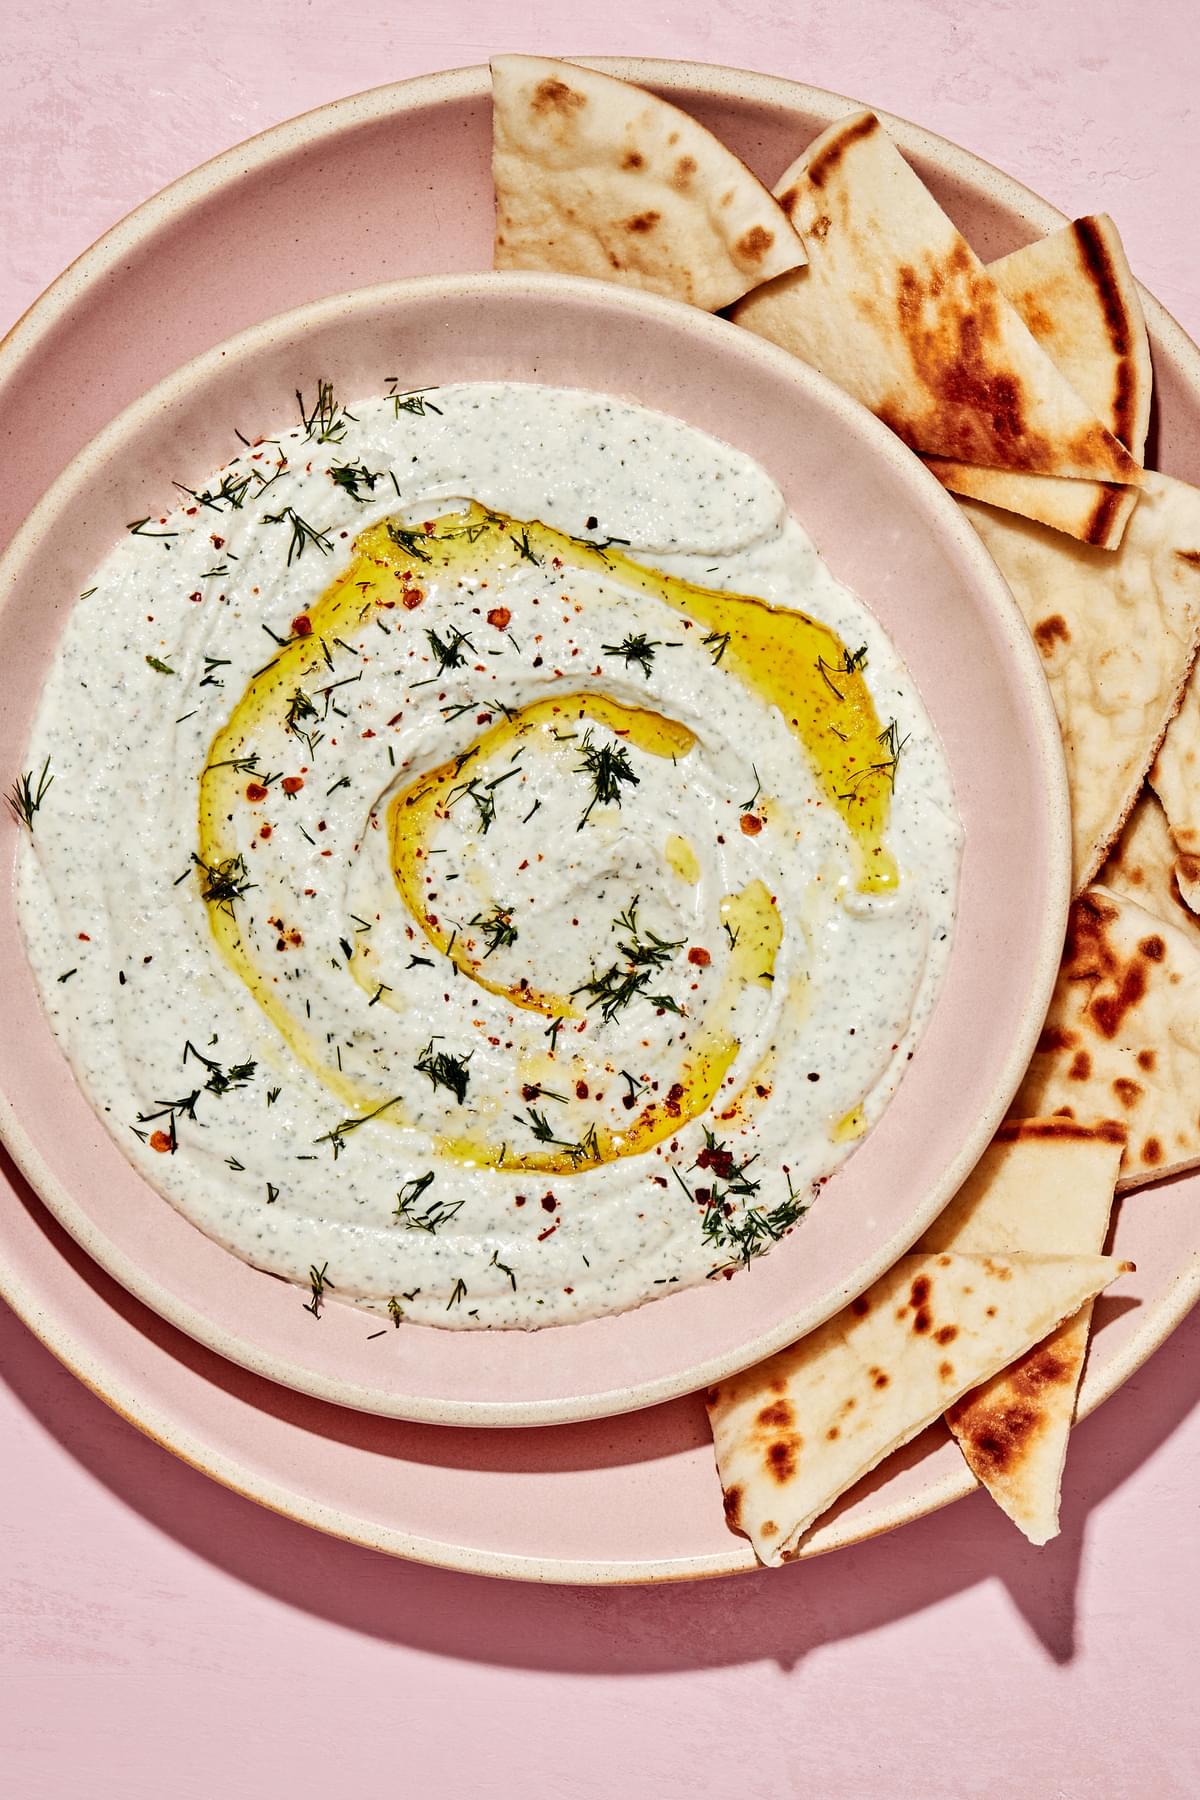 whipped feta dip made with feta, greek yogurt and spices in a serving bowl with sliced pita bread for dipping